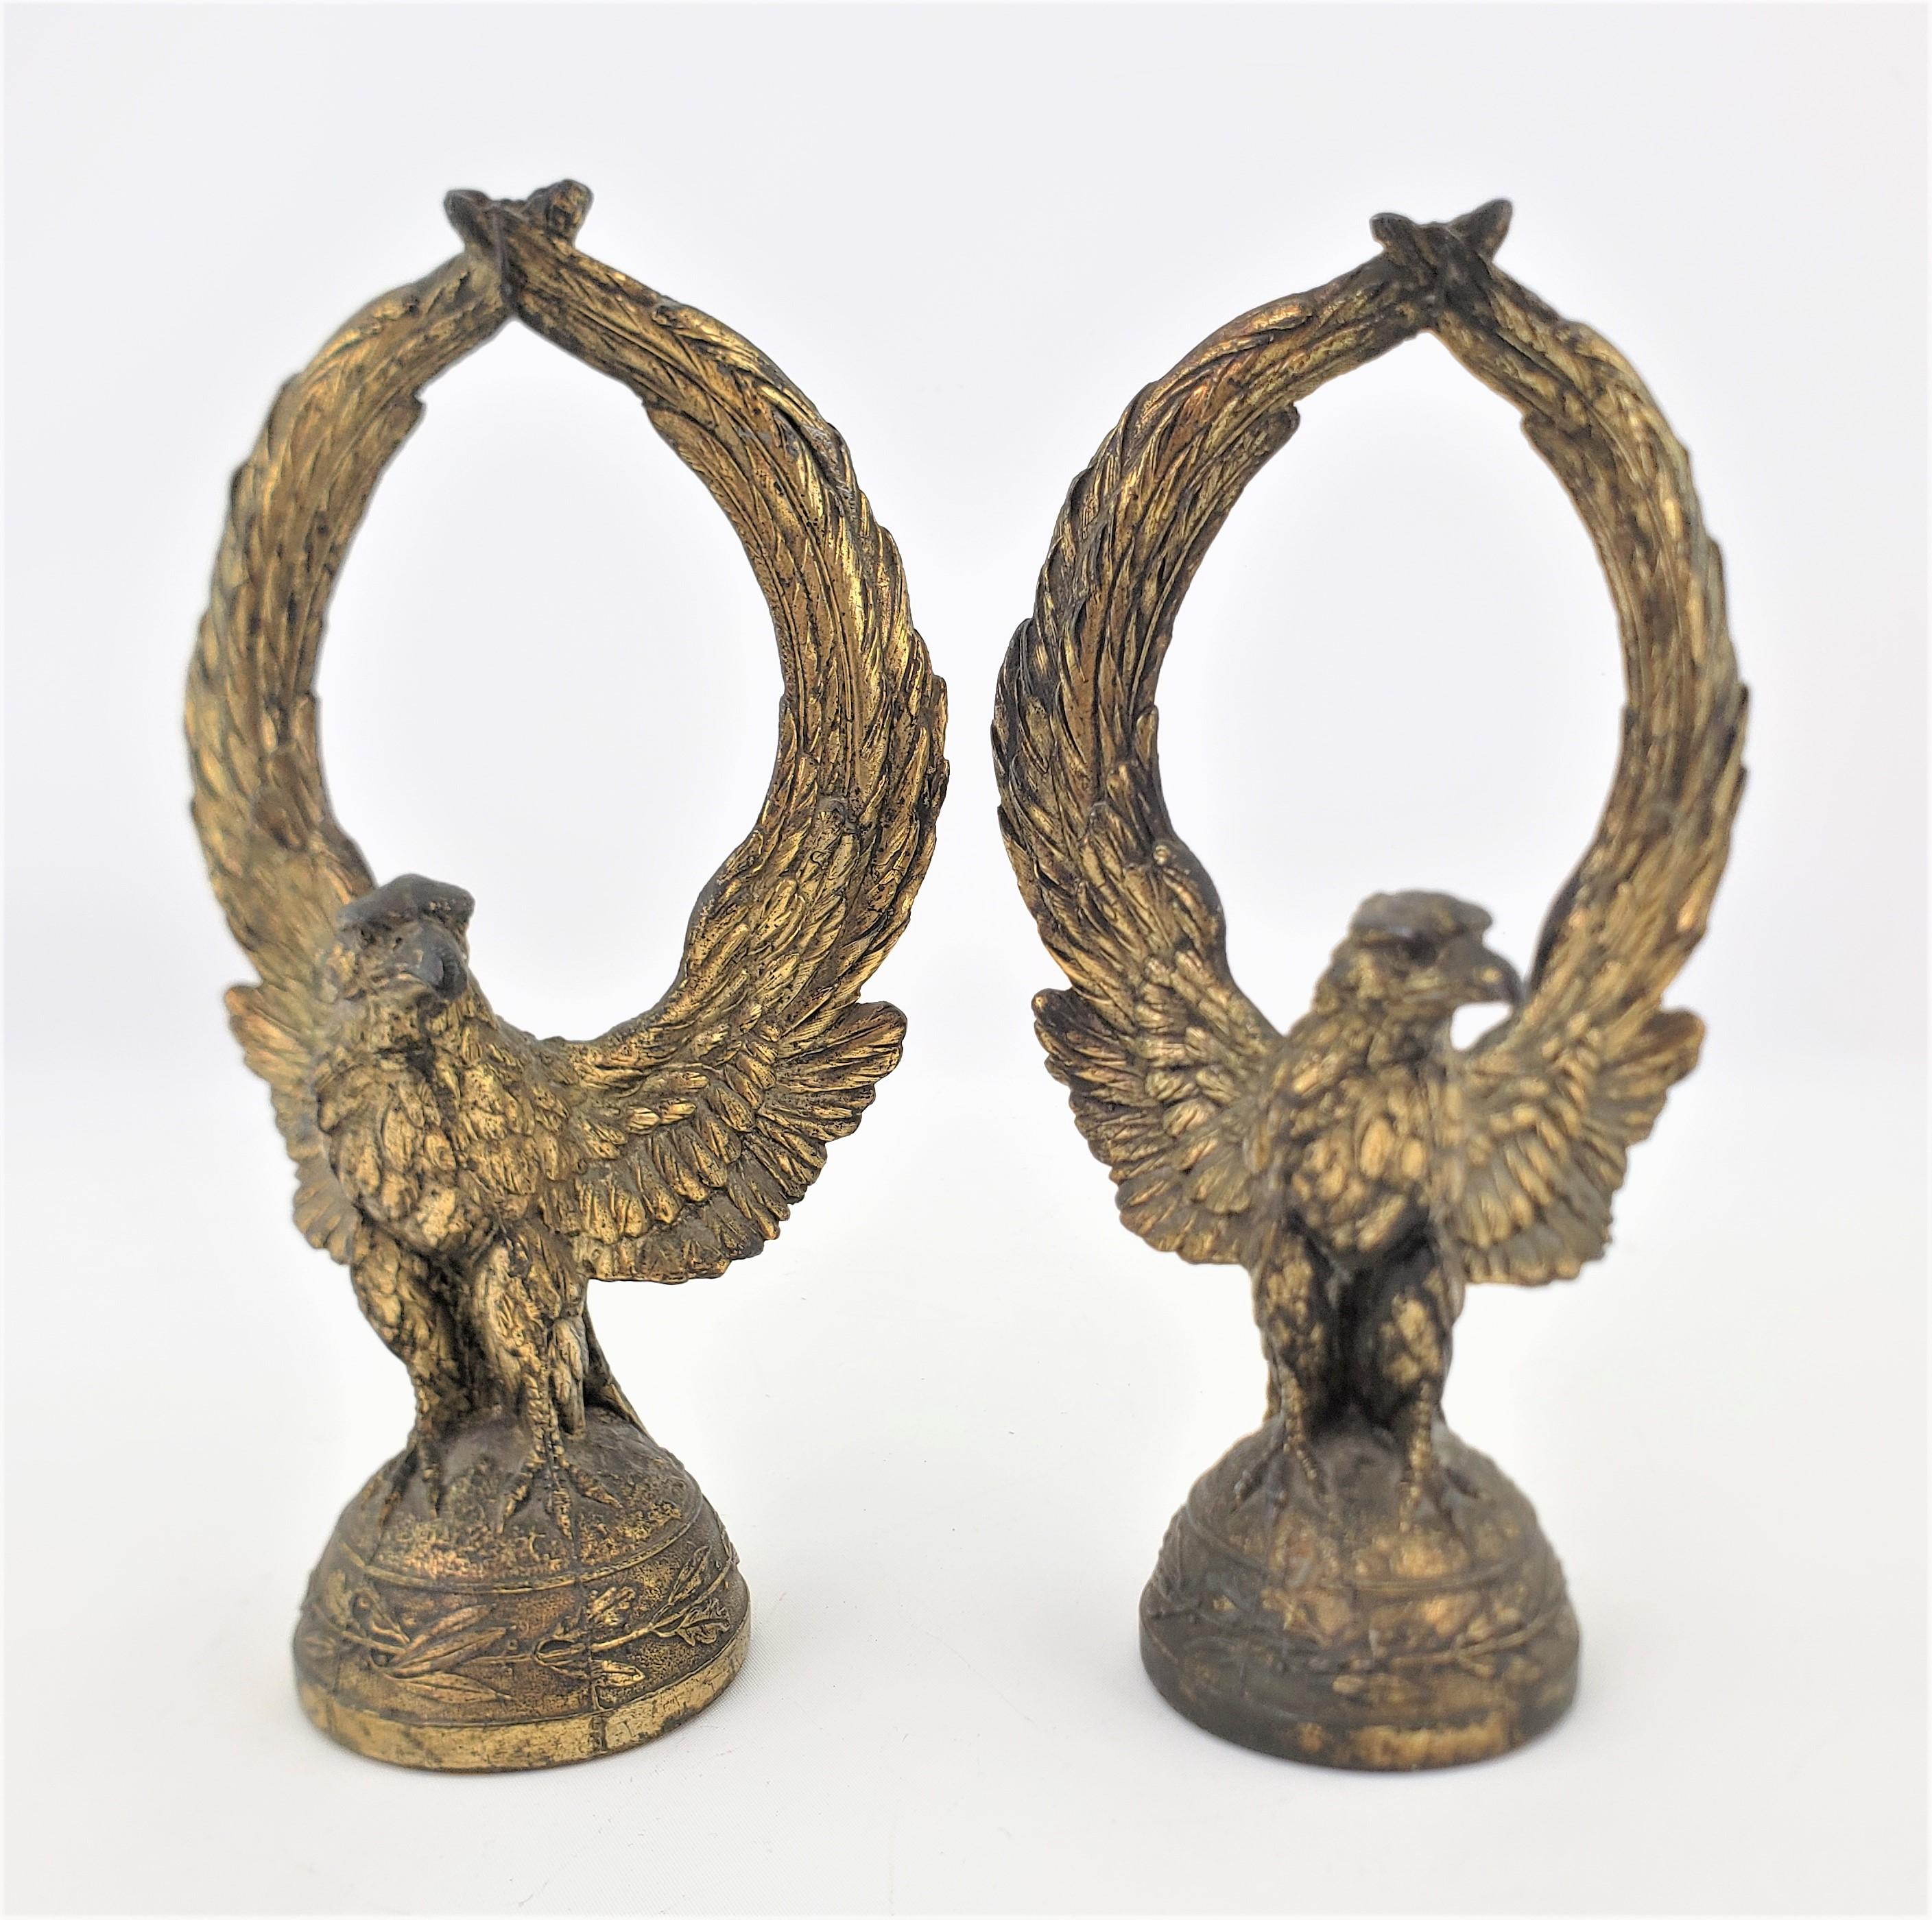 This matched pair of antique figural Bald Eagles are unsigned, but presumed to have been made in the United States in approximately 1900 in an Edwardian style. The eagles are cast in a very realistic and detailed manner in a spelter or base metal,